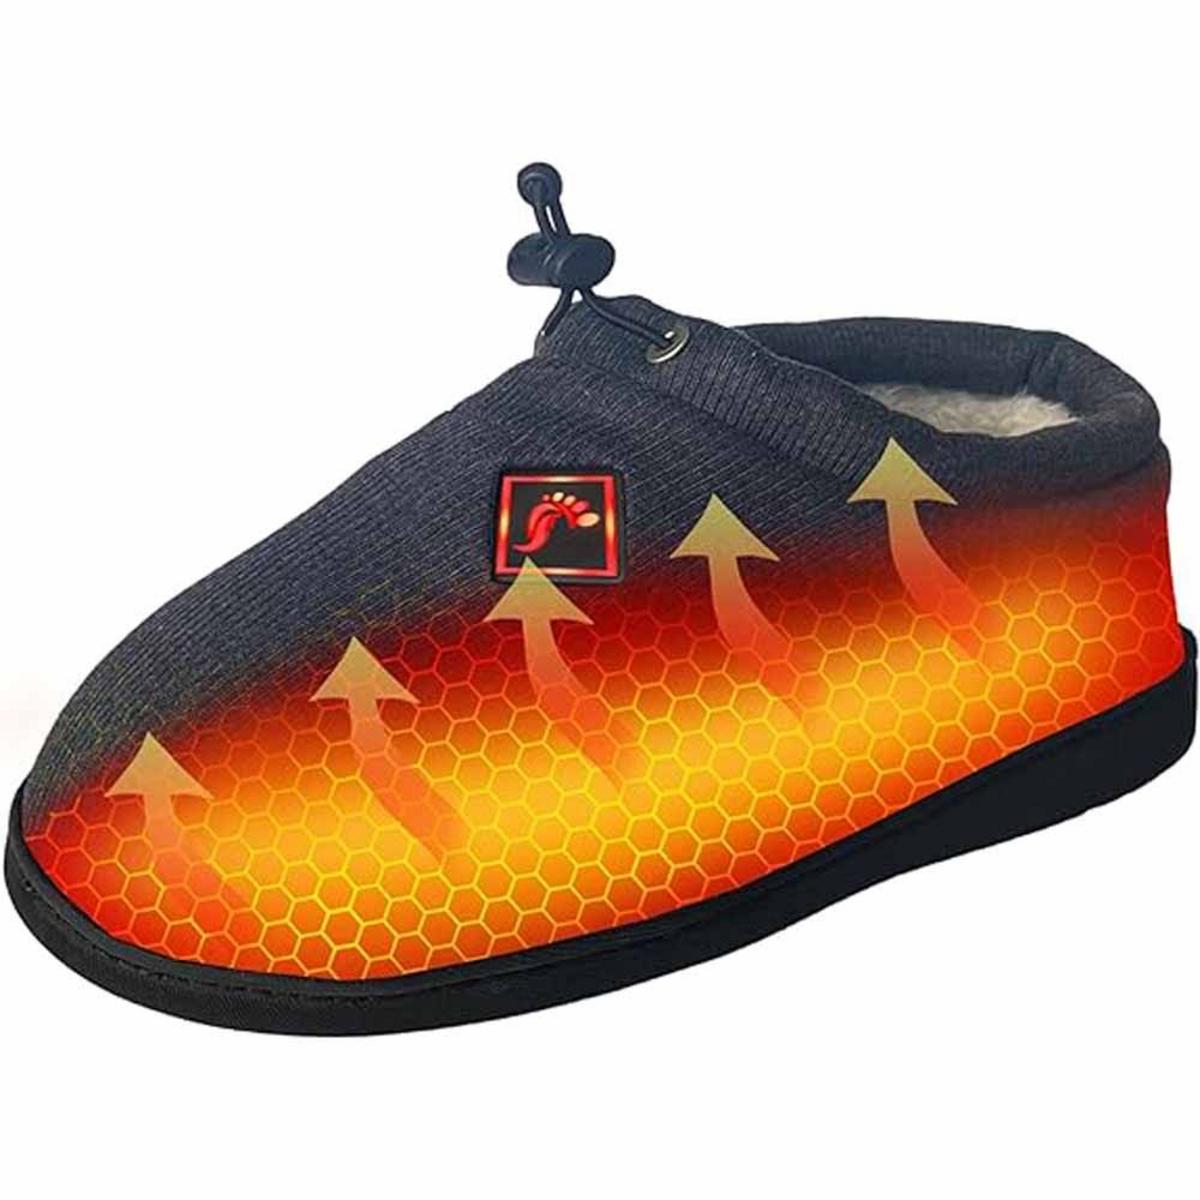 ThermalStep Rechargeable Electric Heated Slippers